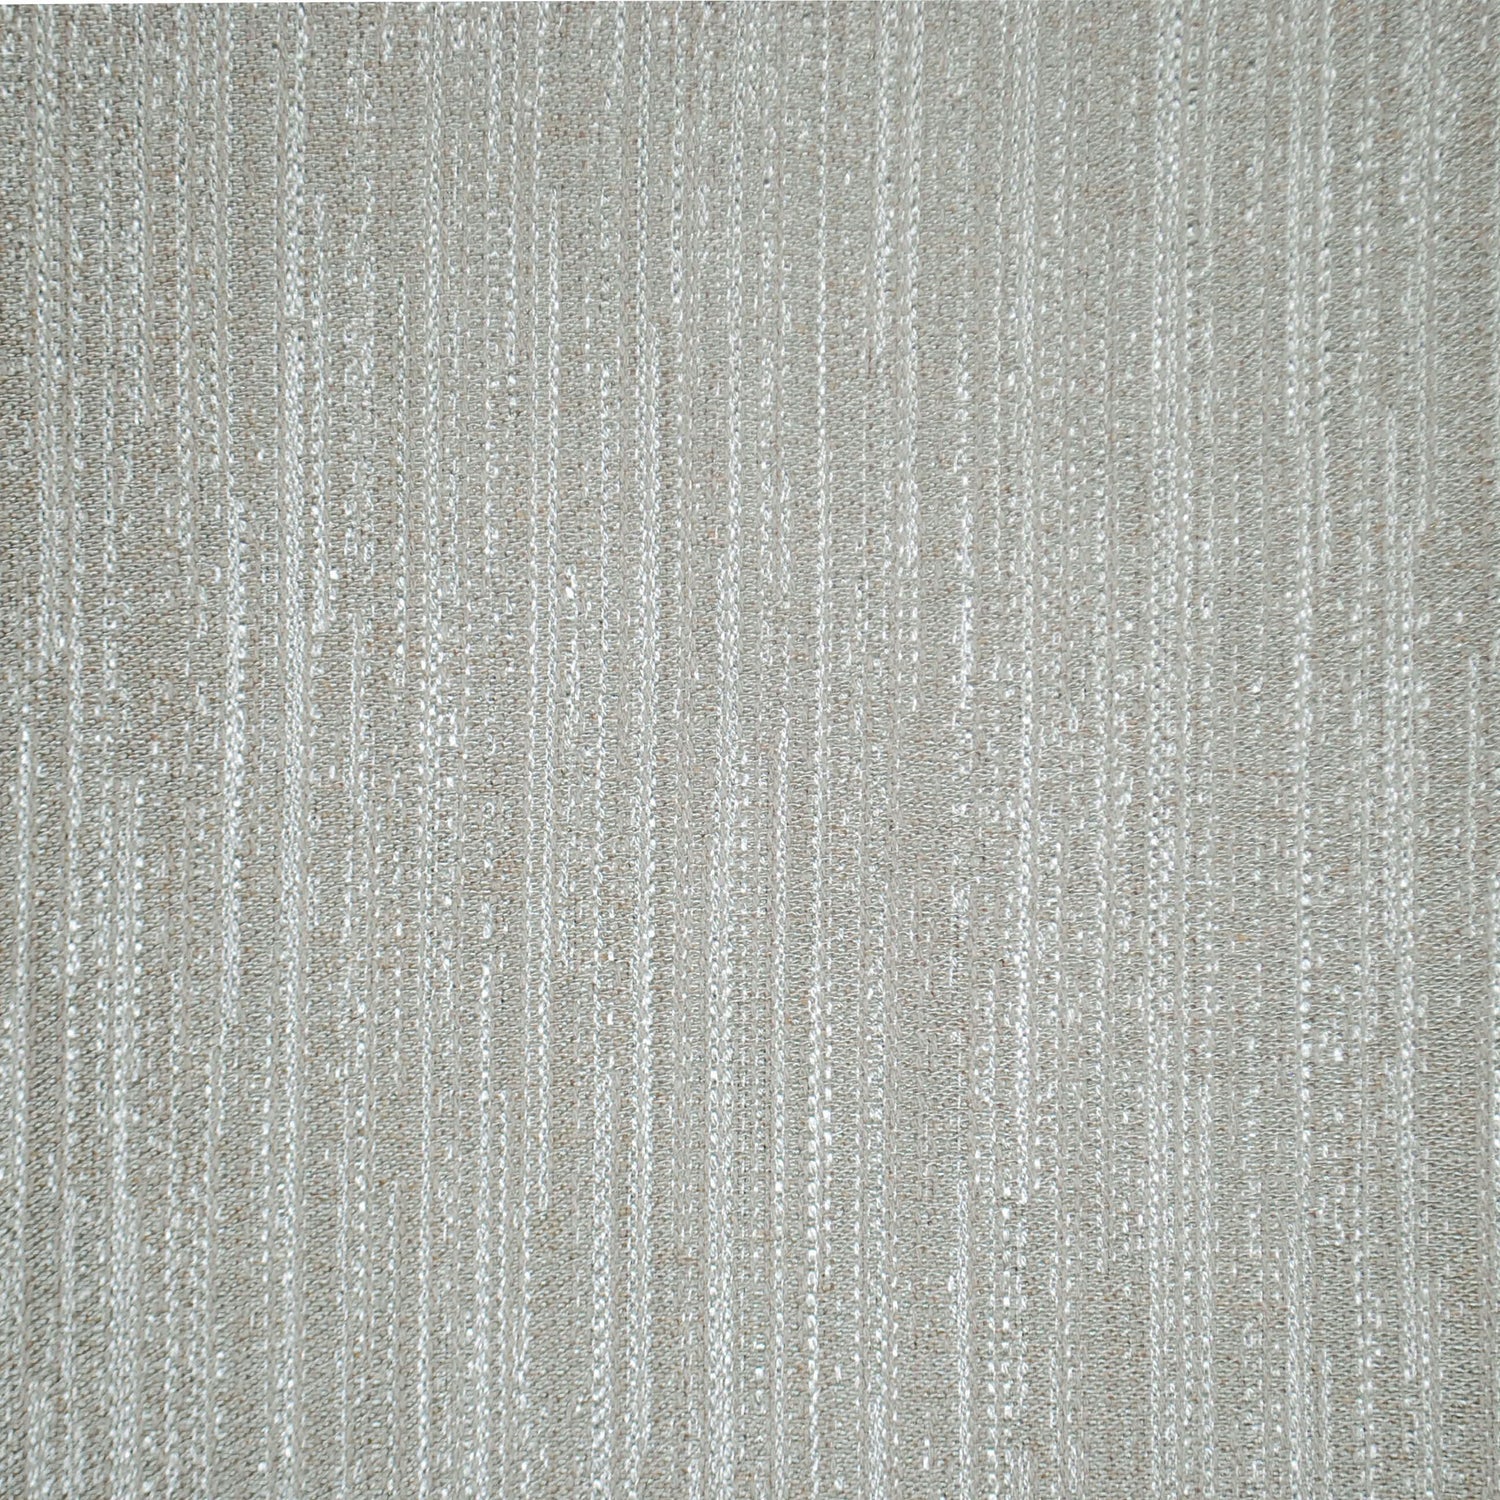 Ligonier fabric in grey color - pattern number M8 00019879 - by Scalamandre in the Old World Weavers collection